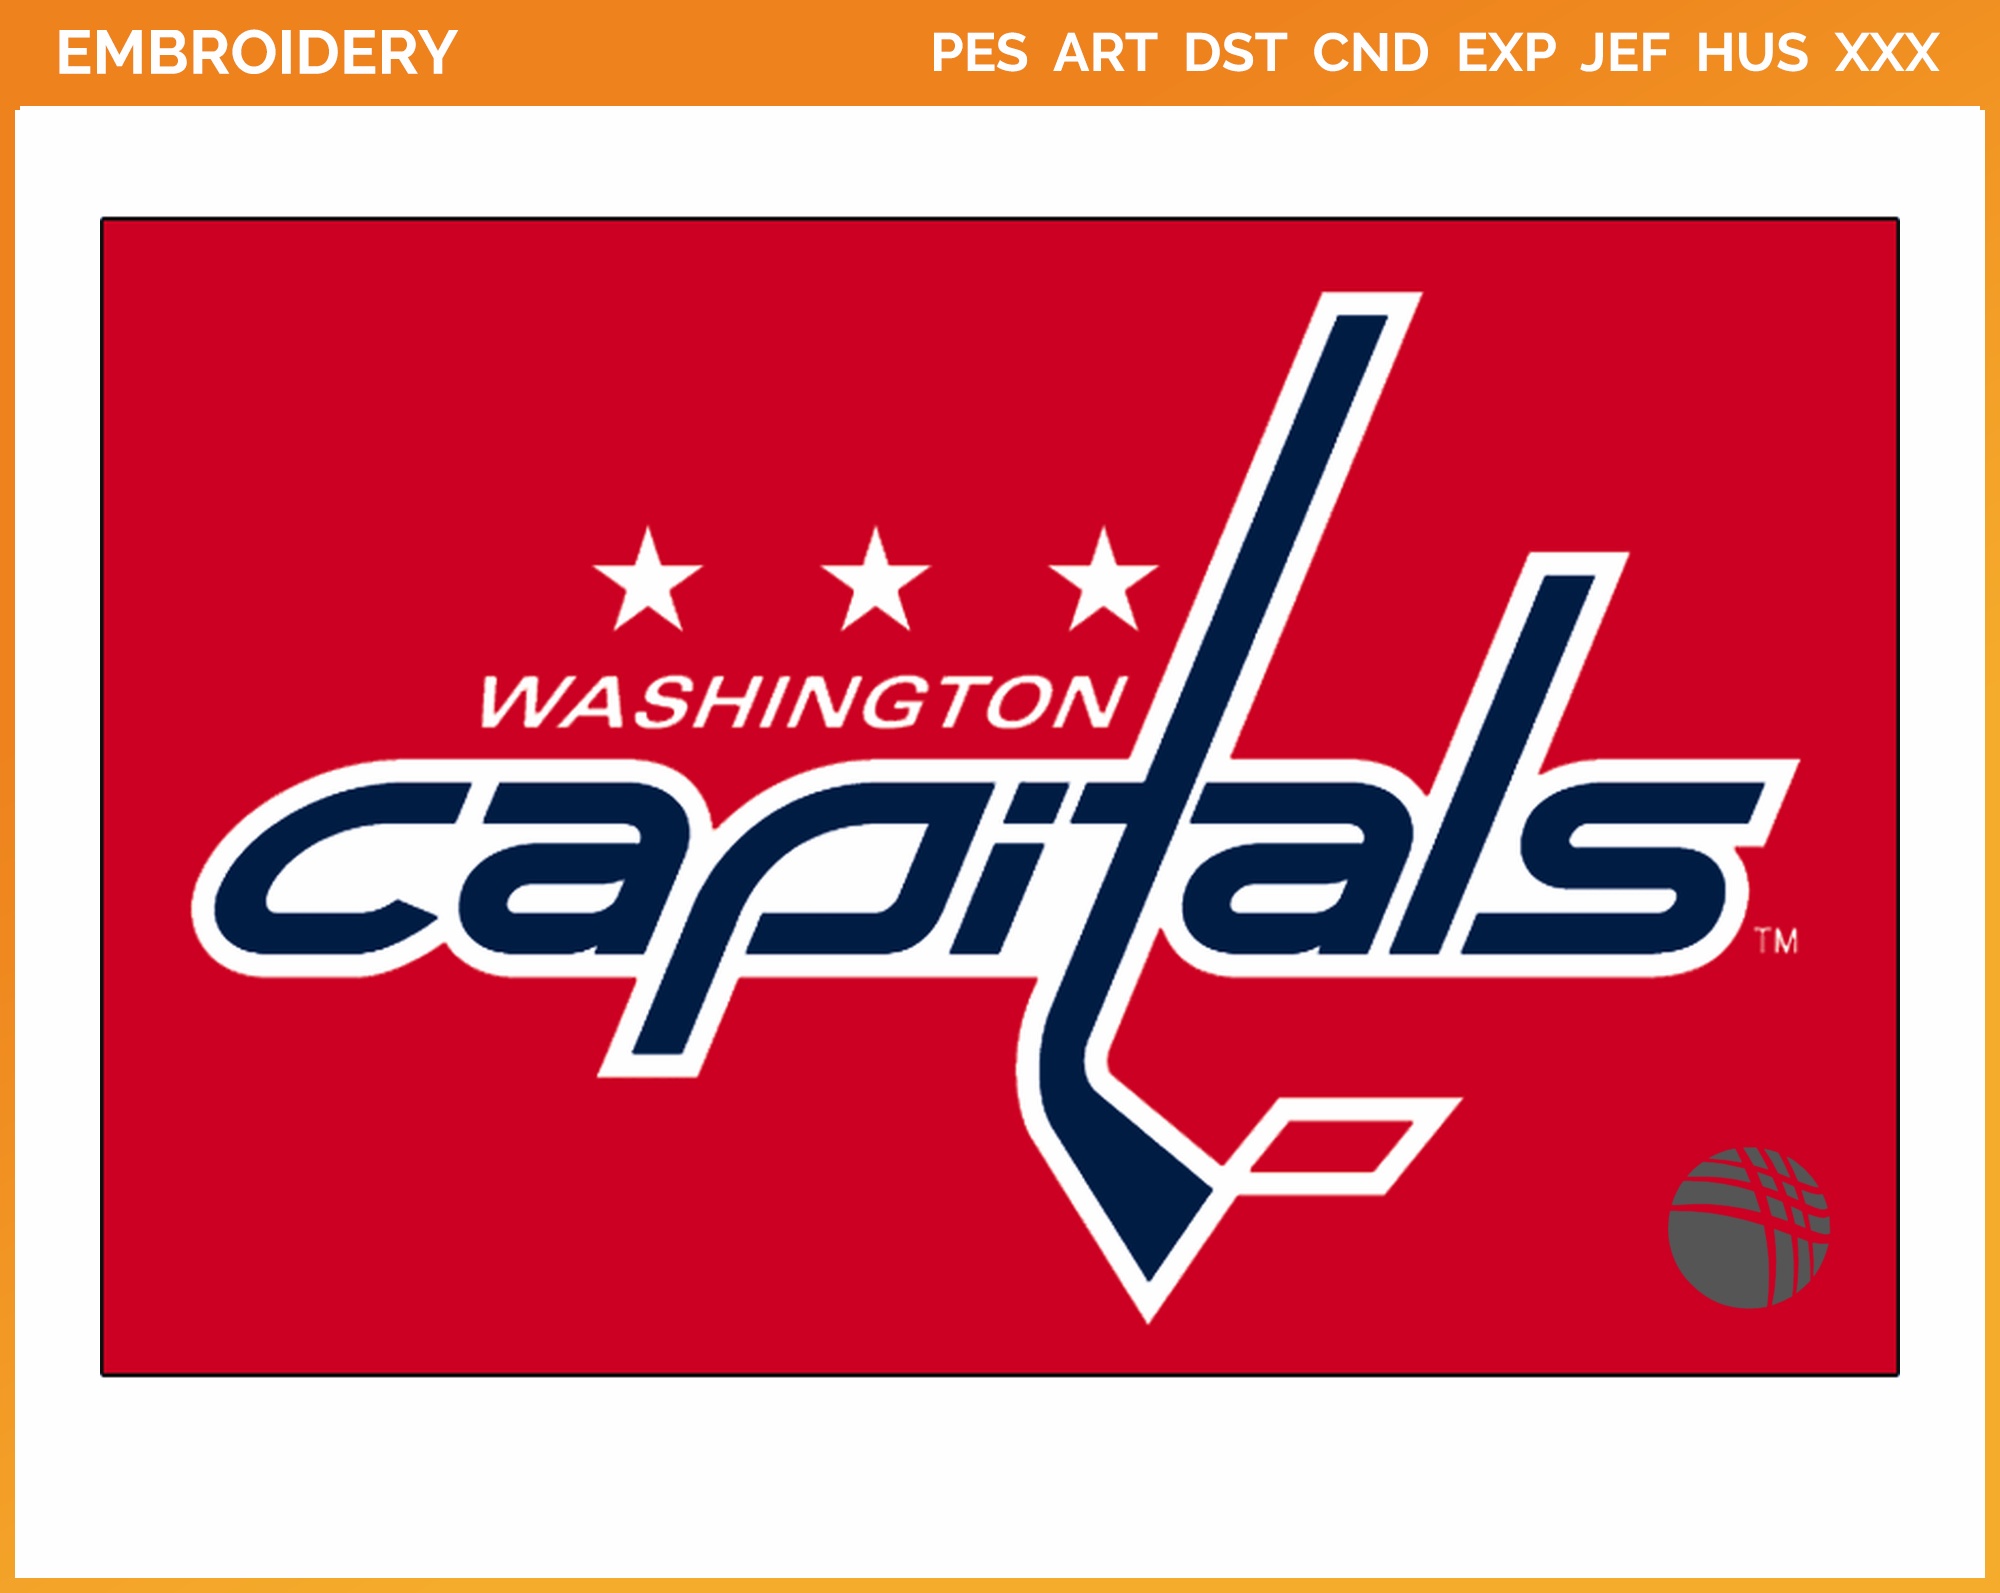 Washington Capitals 2007-08 jersey artwork, This is a highl…